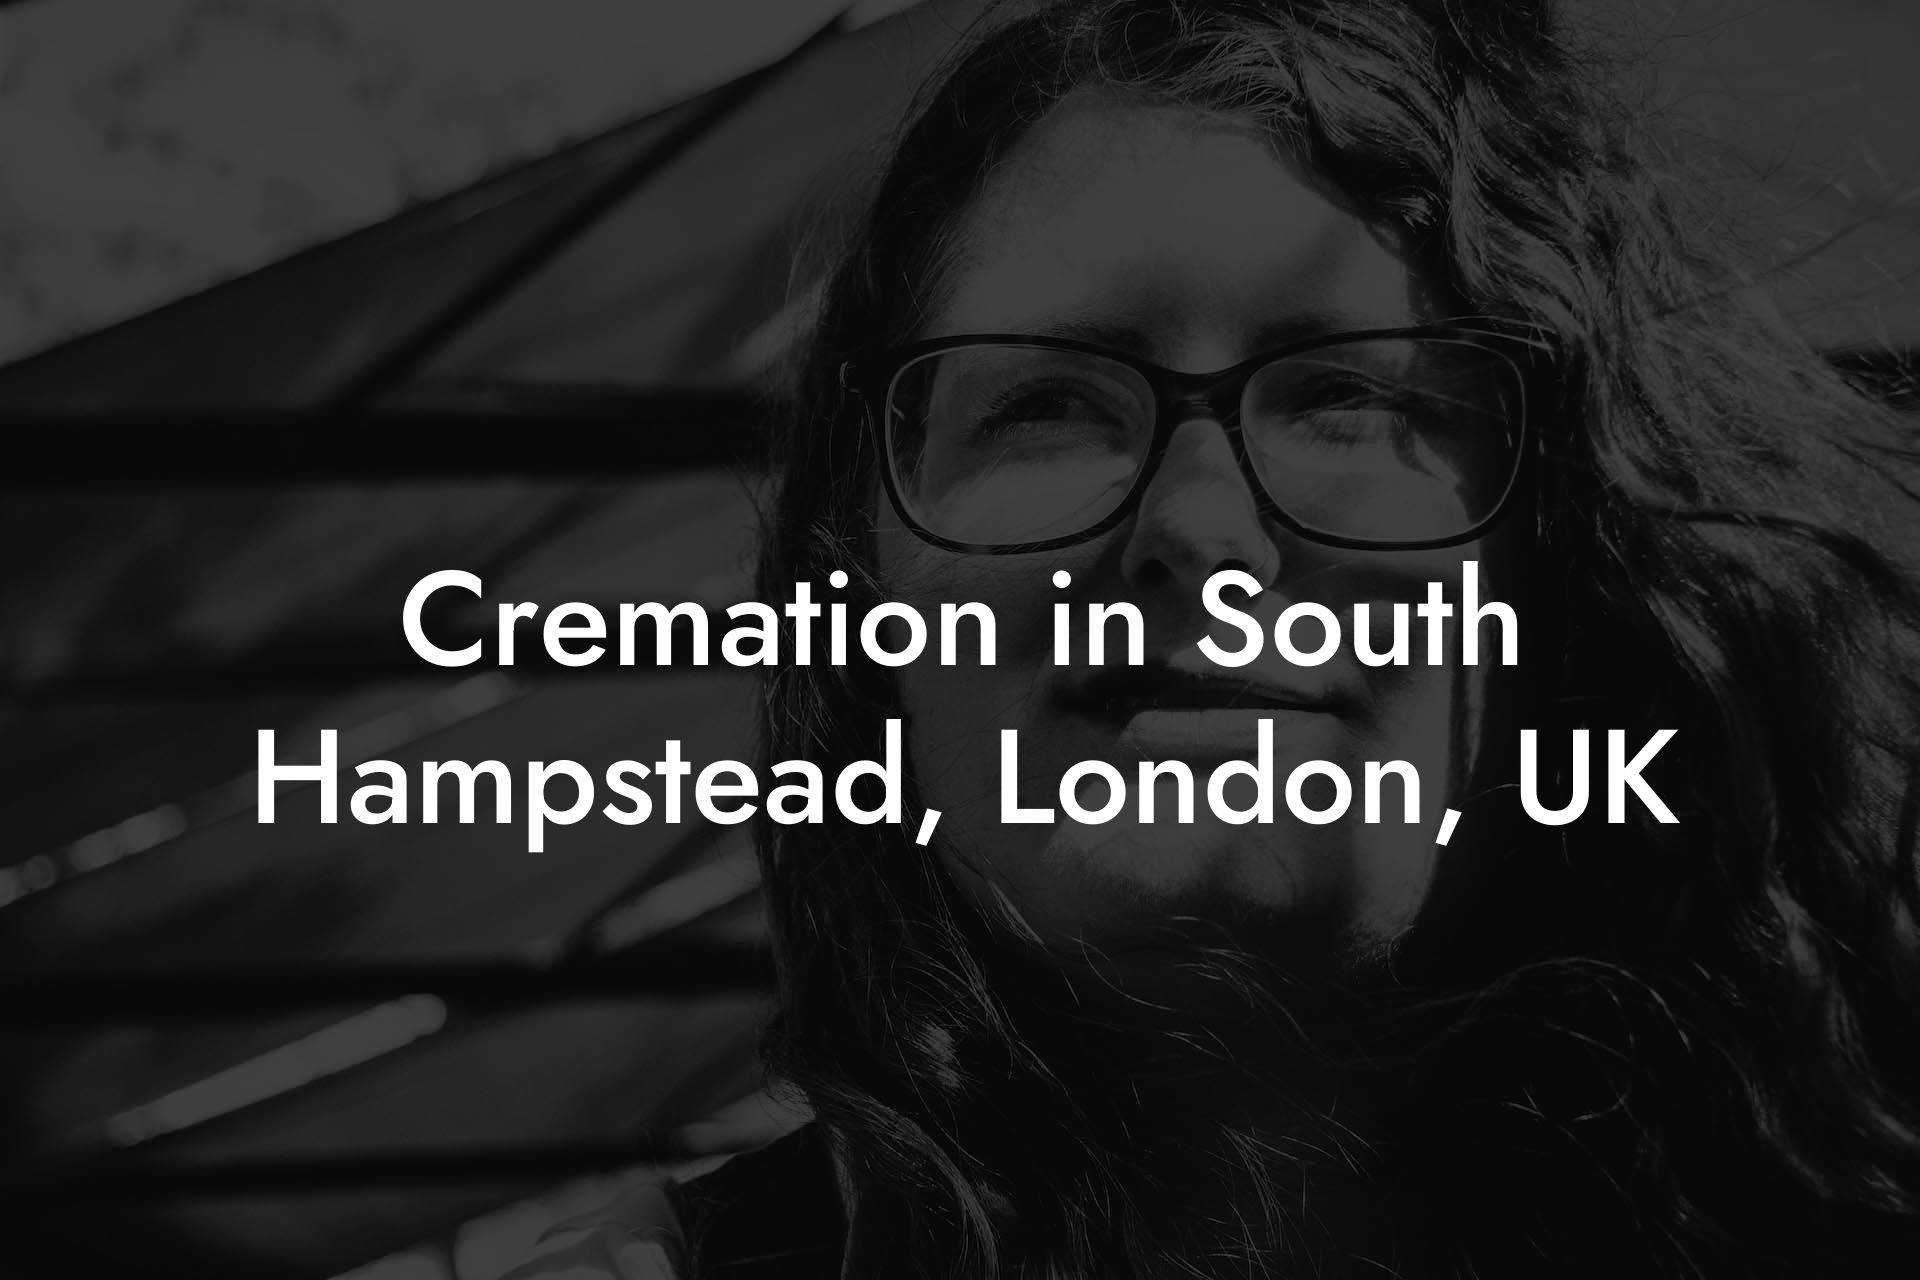 Cremation in South Hampstead, London, UK